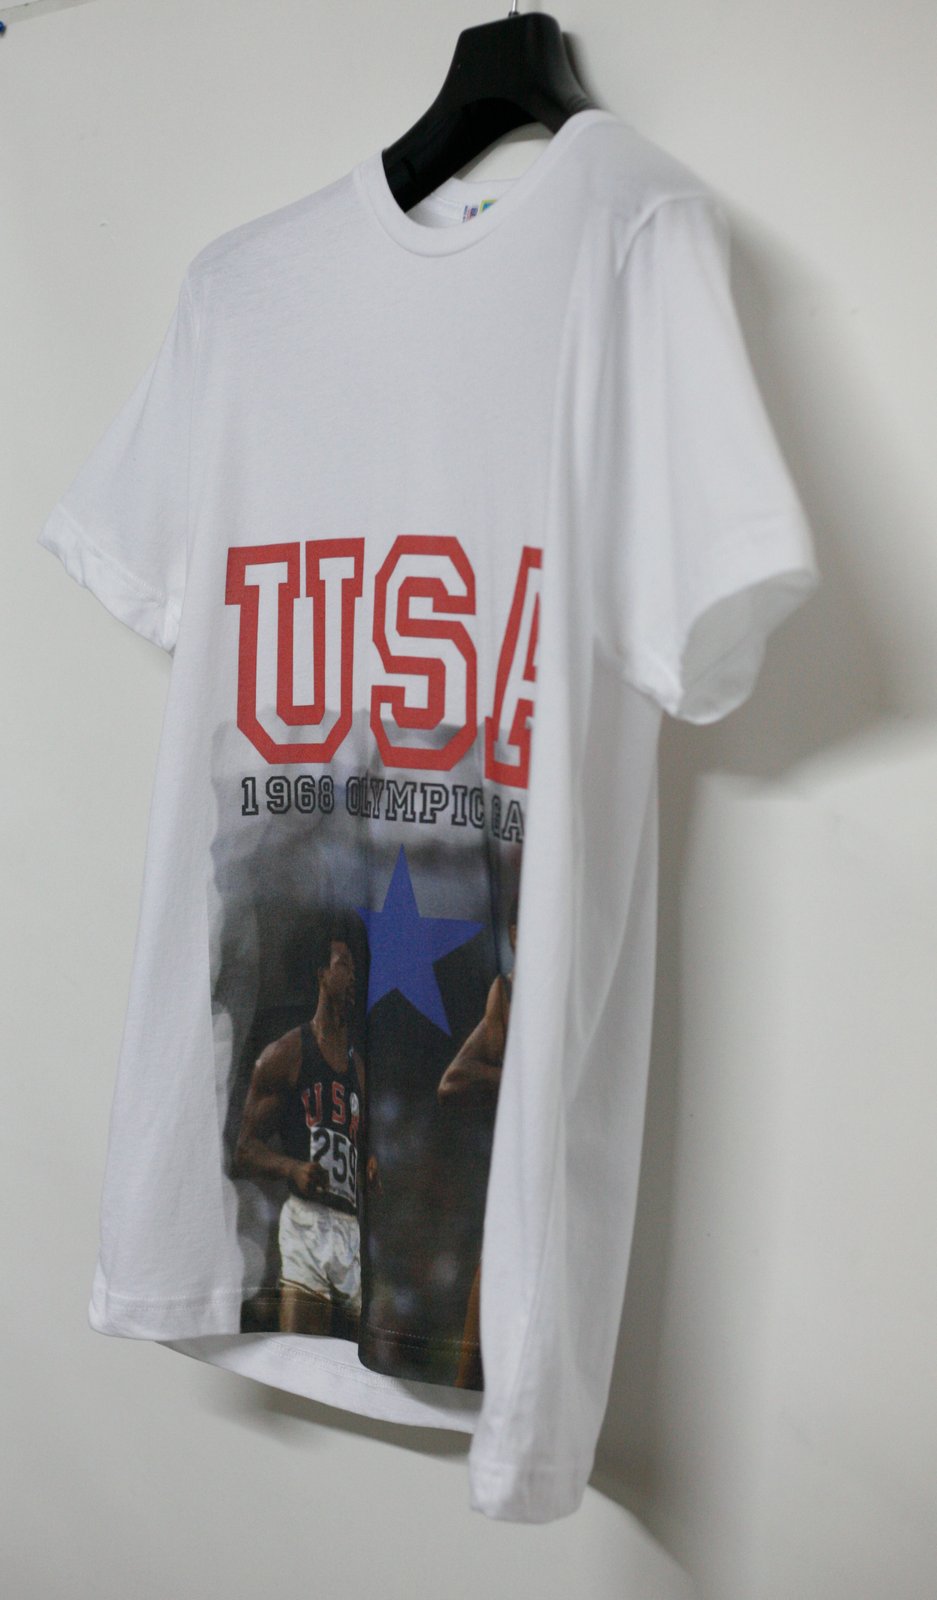 john carlos and tommie smith t shirt